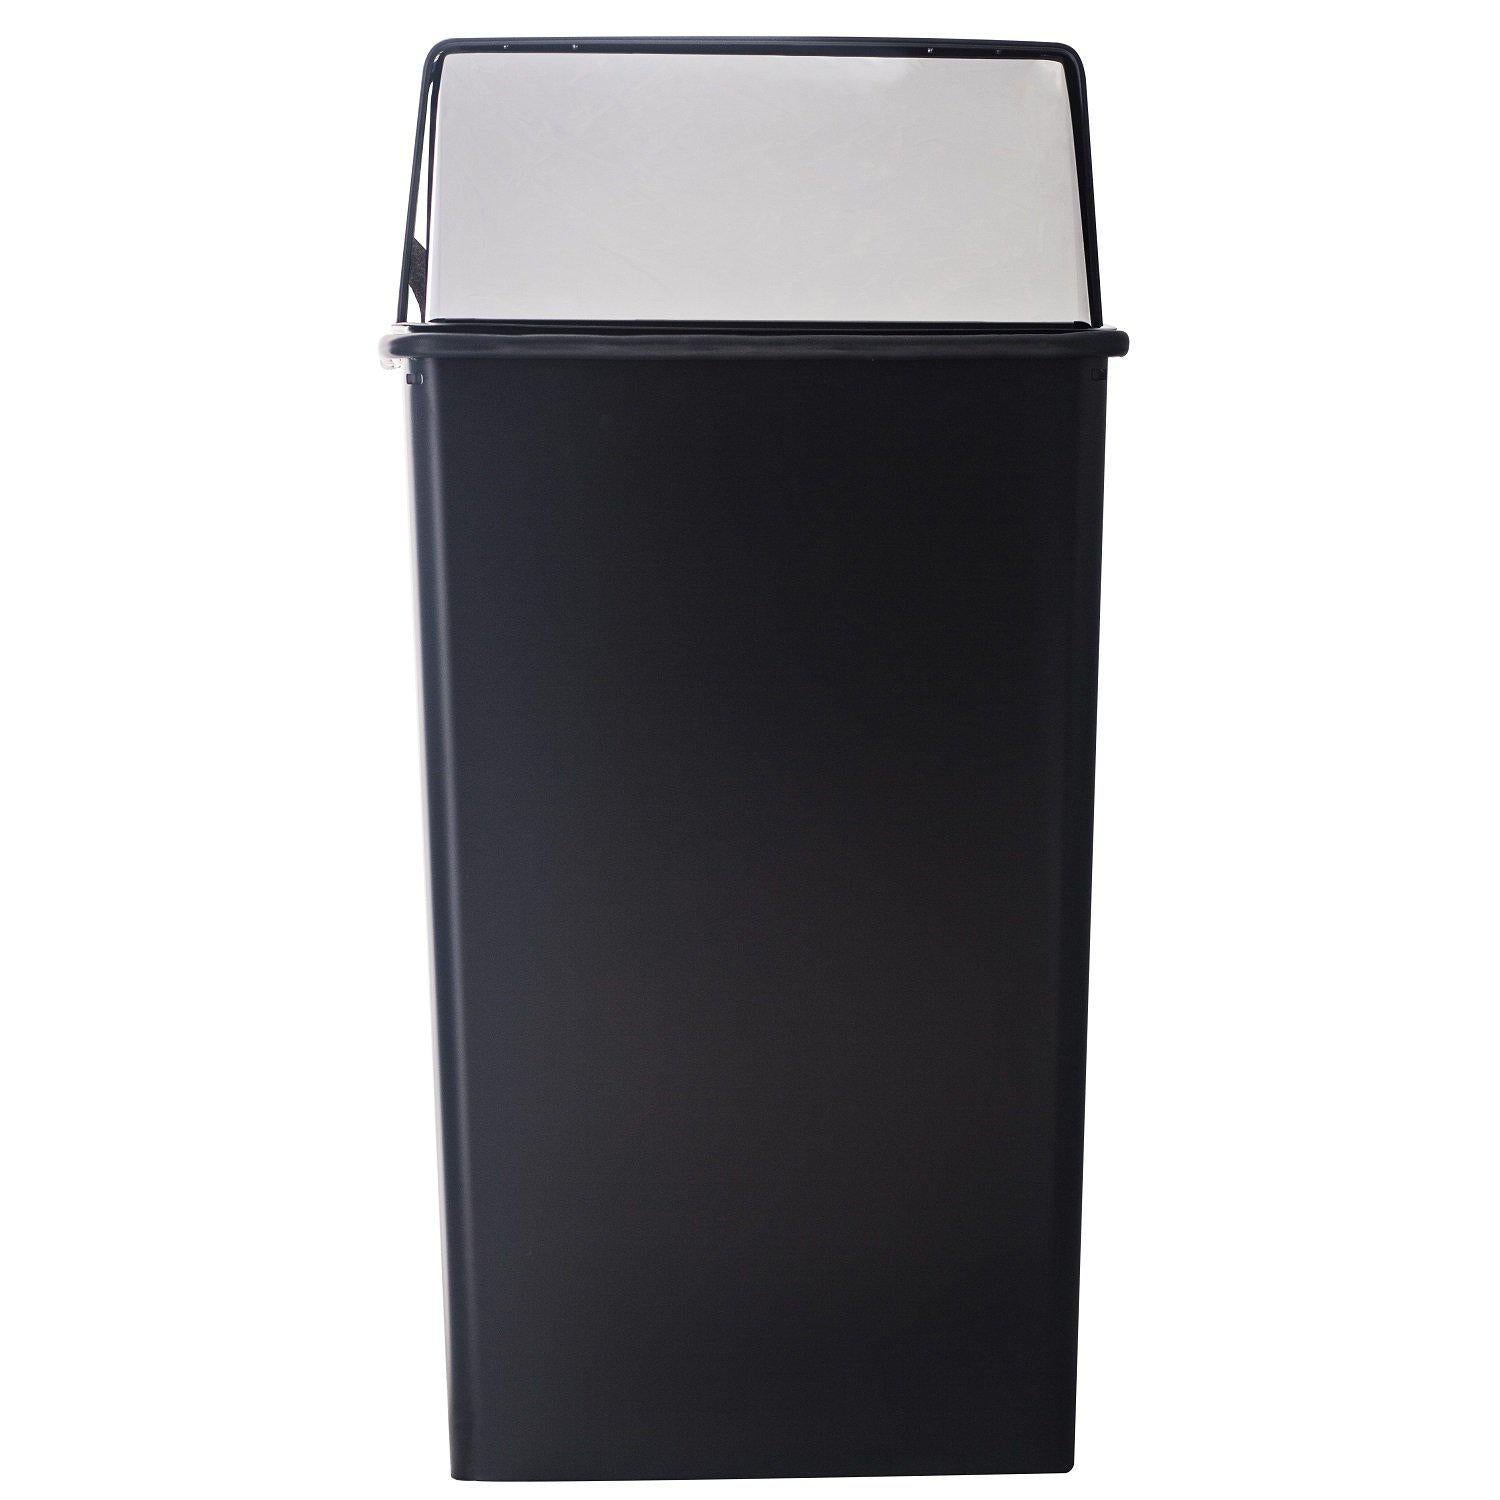 Monarch Series Push Top Hamper Design Indoor Waste Receptacle, 36-Gallon Capacity, Black with Chrome Accents